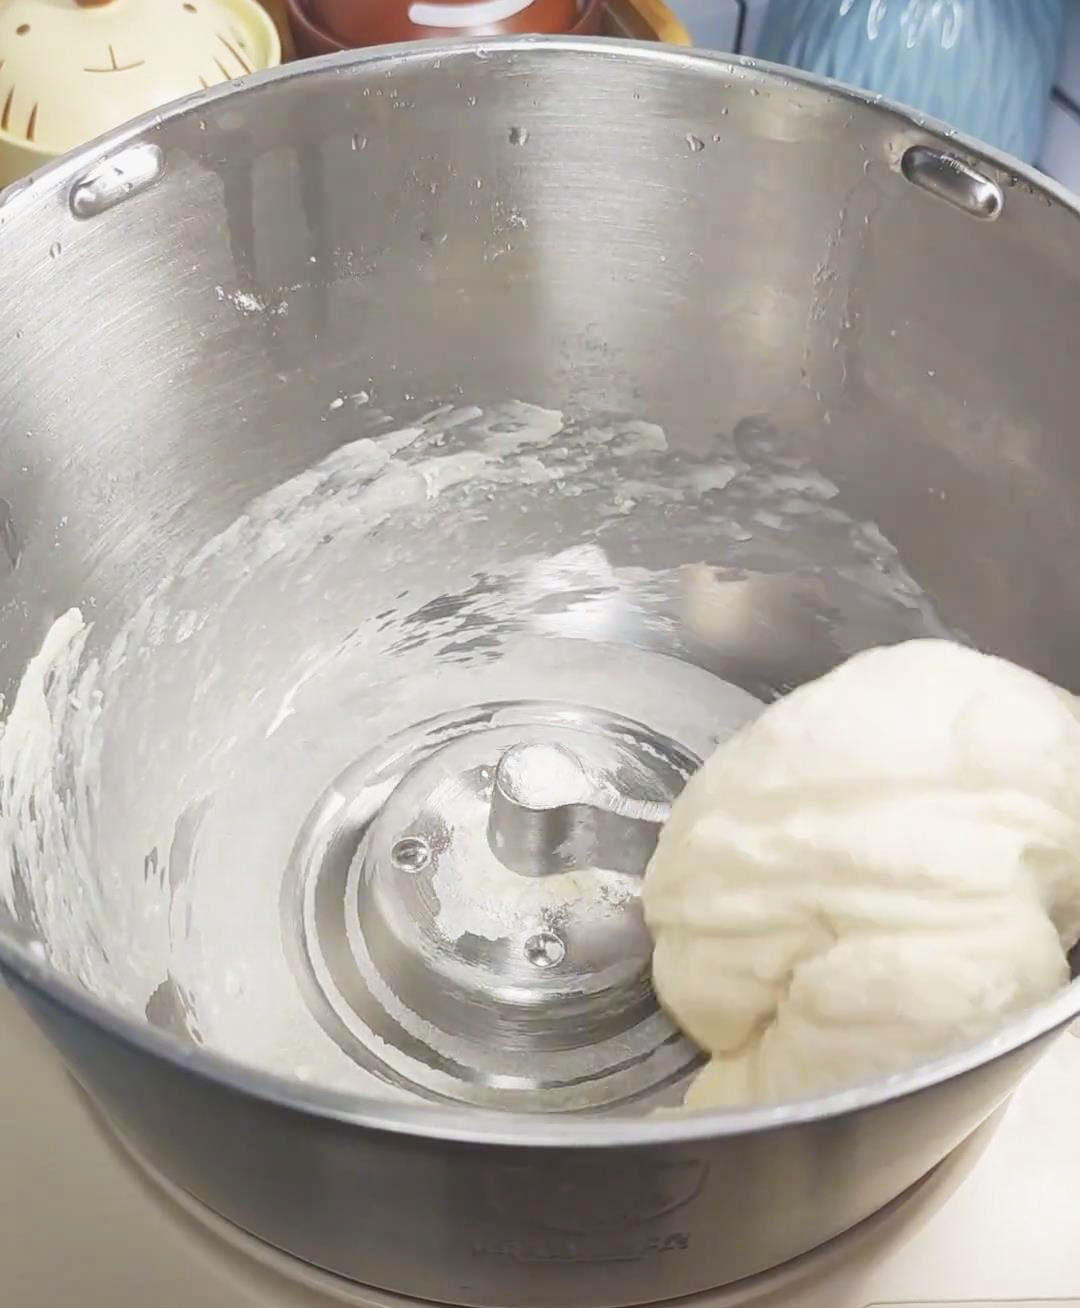 Knead the dough until smooth and pliable